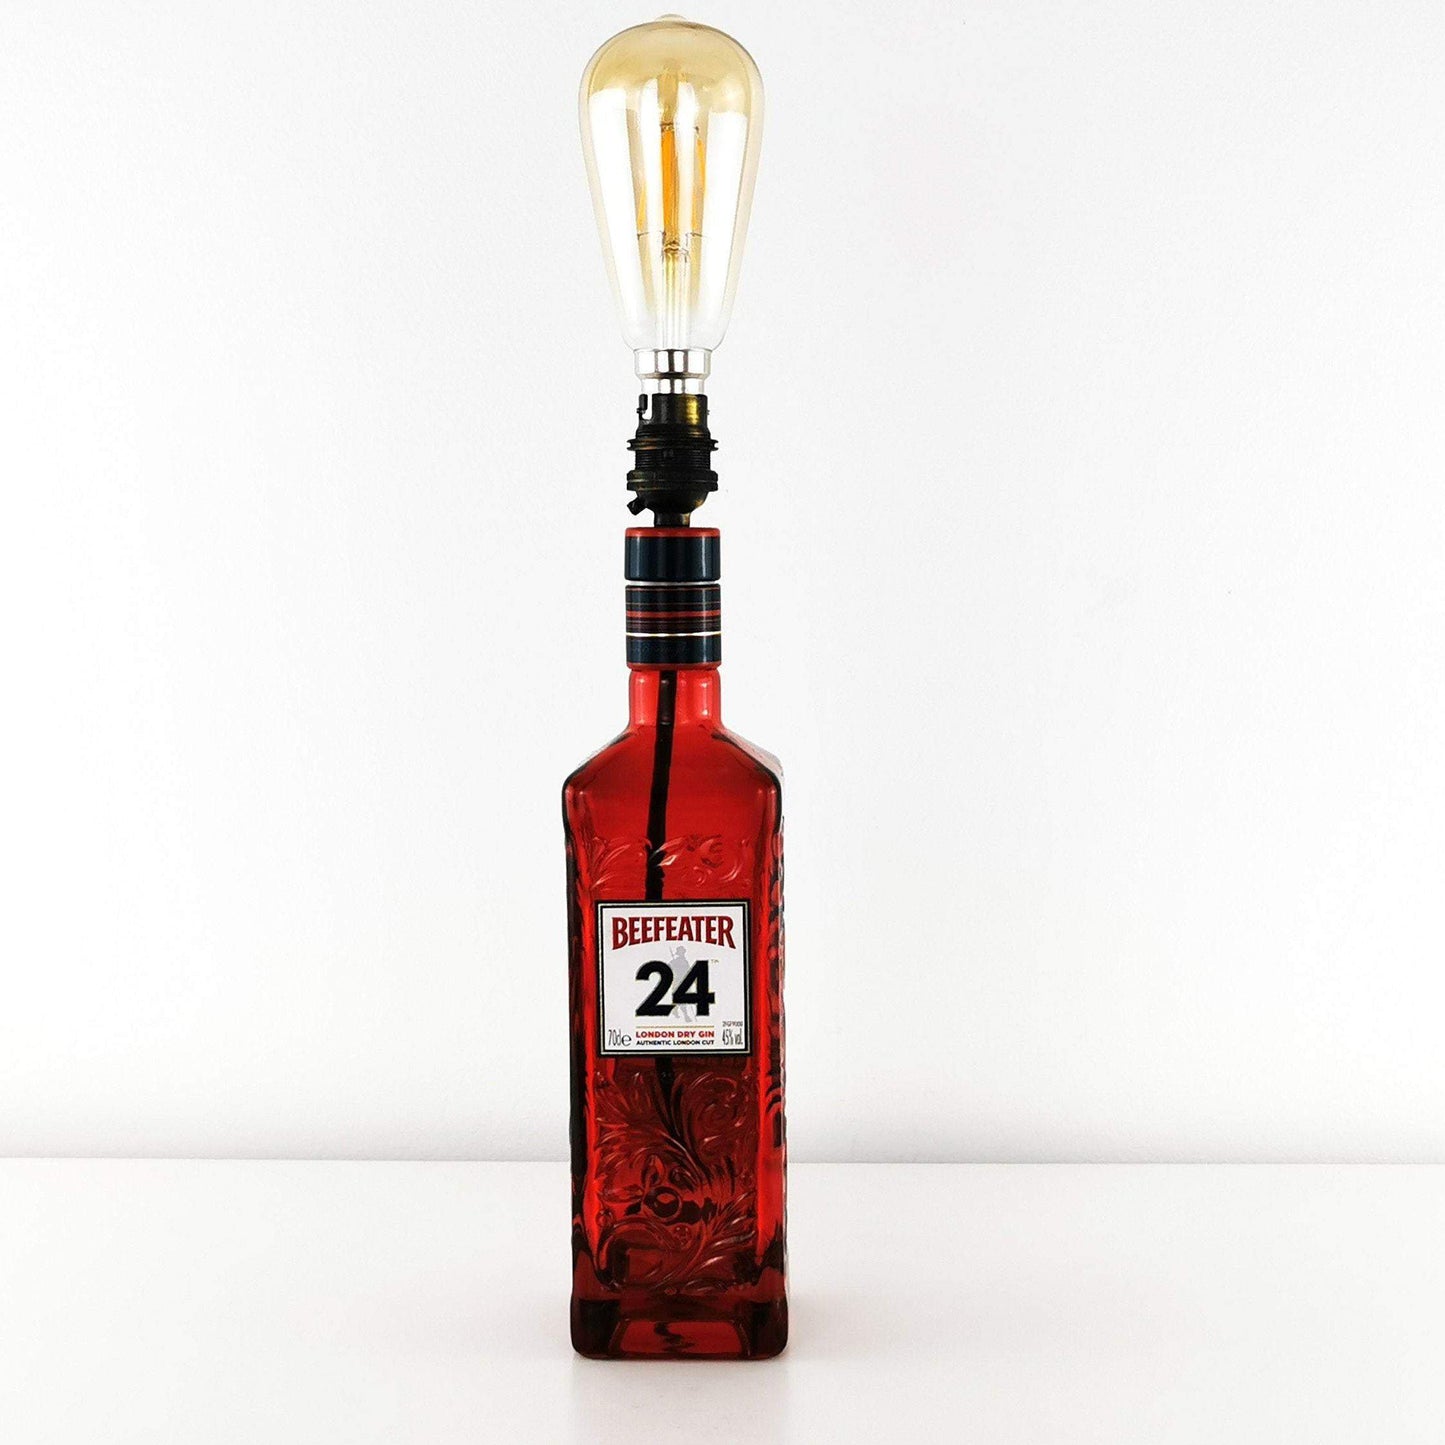 Beefeater 24 Gin Bottle Table Lamp Gin Bottle Table Lamps